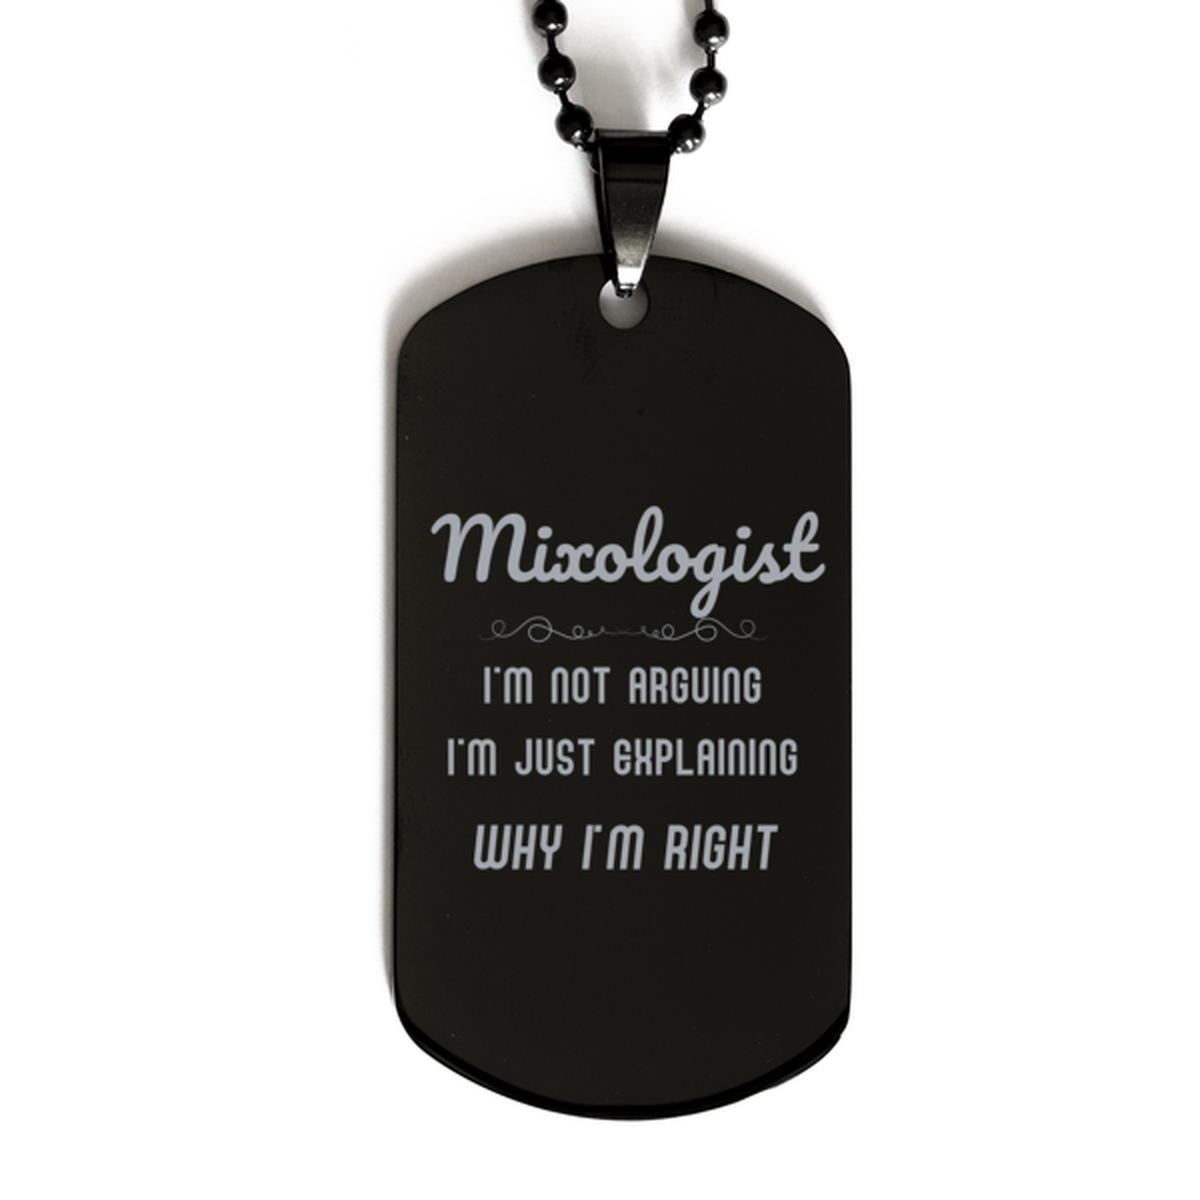 Mixologist I'm not Arguing. I'm Just Explaining Why I'm RIGHT Black Dog Tag, Funny Saying Quote Mixologist Gifts For Mixologist Graduation Birthday Christmas Gifts for Men Women Coworker